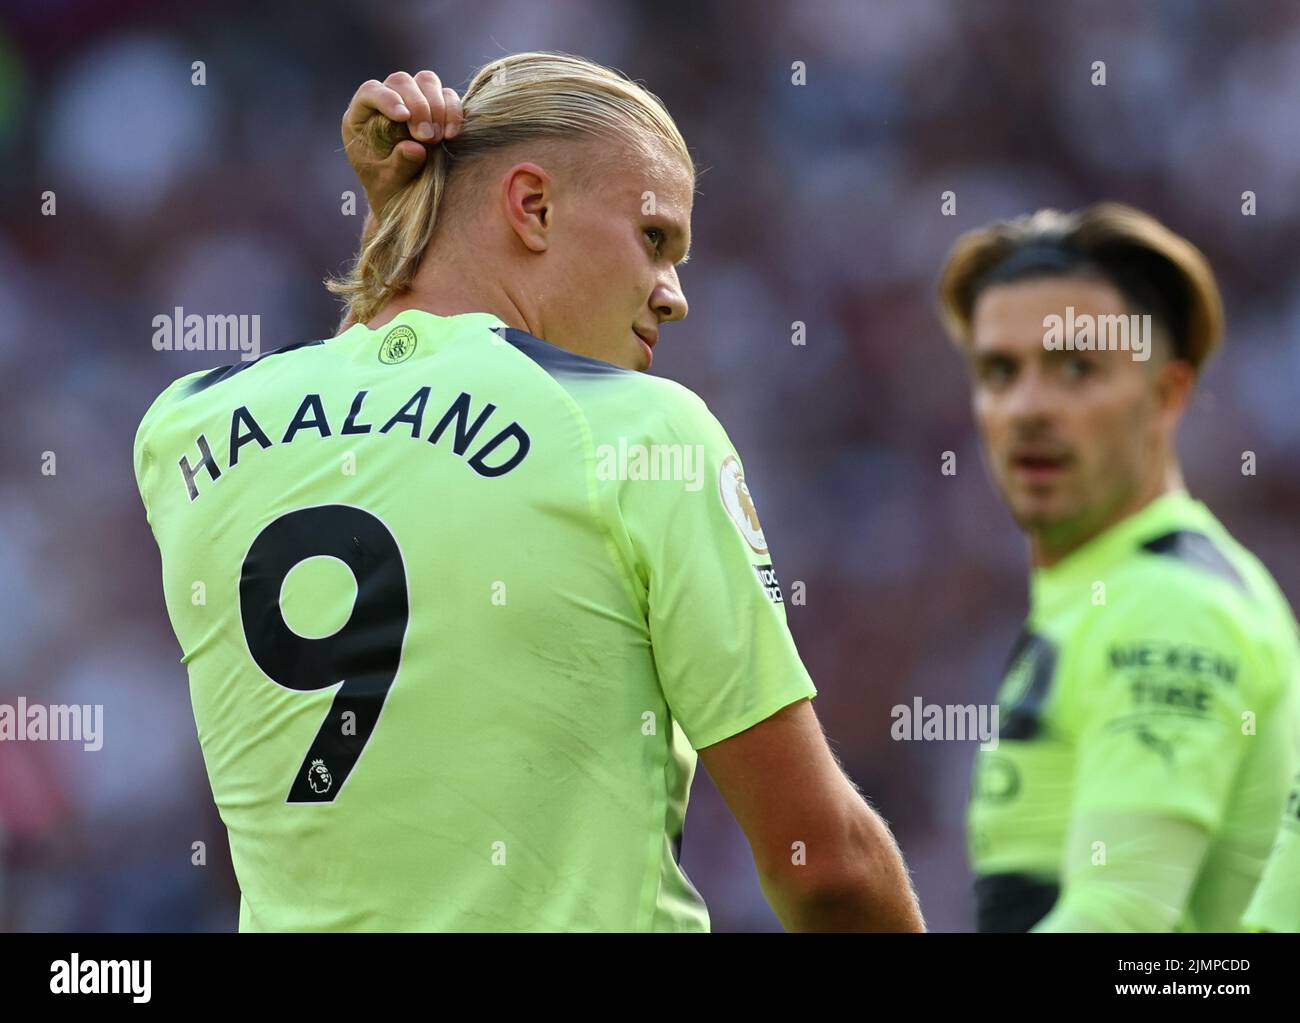 London, UK. 7th Aug, 2022. Erling Haland of Manchester City adjusts his hair after scoring the first goal during the Premier League match at the London Stadium, London. Picture credit should read: David Klein/Sportimage Credit: Sportimage/Alamy Live News Stock Photo